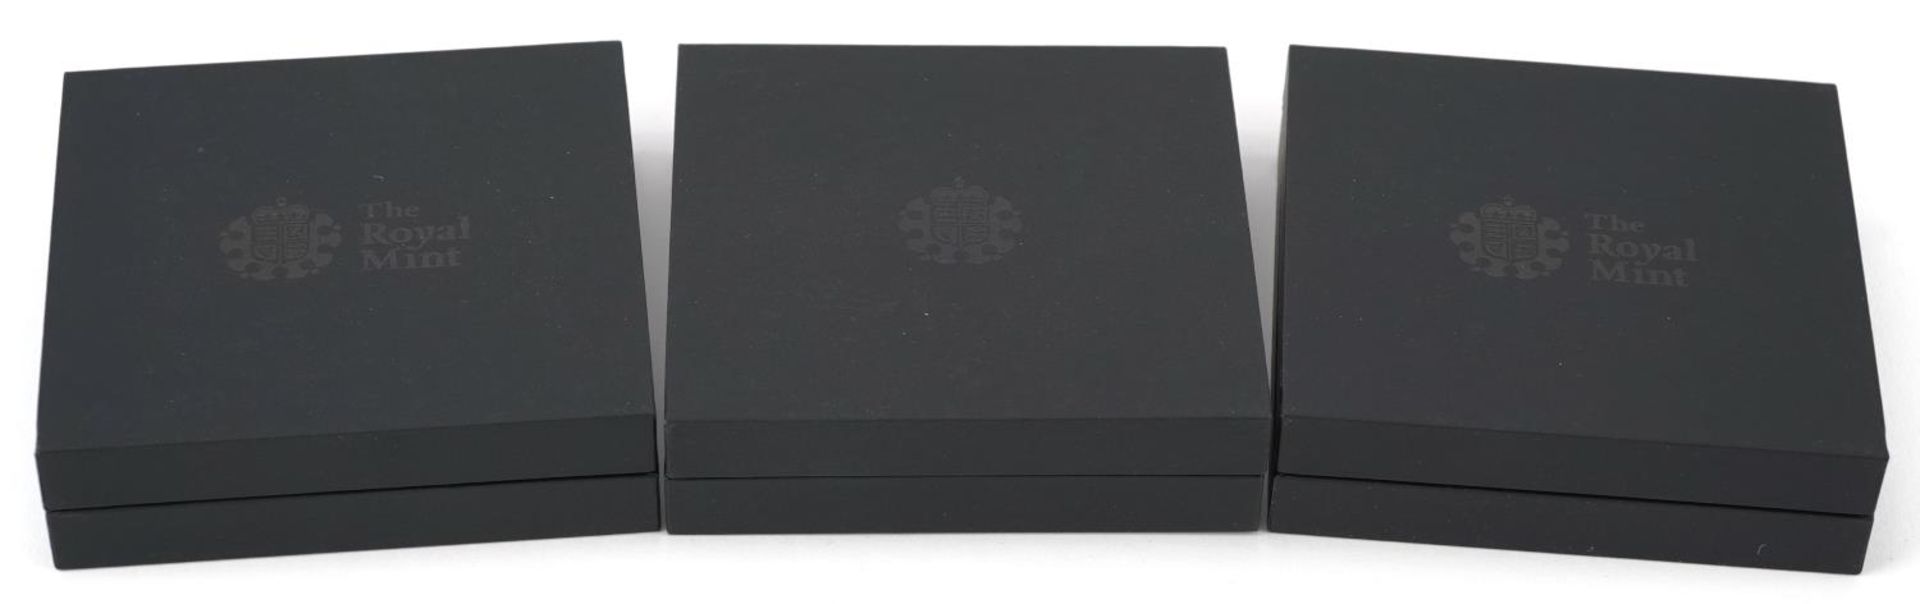 Three silver proof coins by The Royal Mint with cases and boxes, comprising 2019 one ounce coin - Bild 3 aus 3